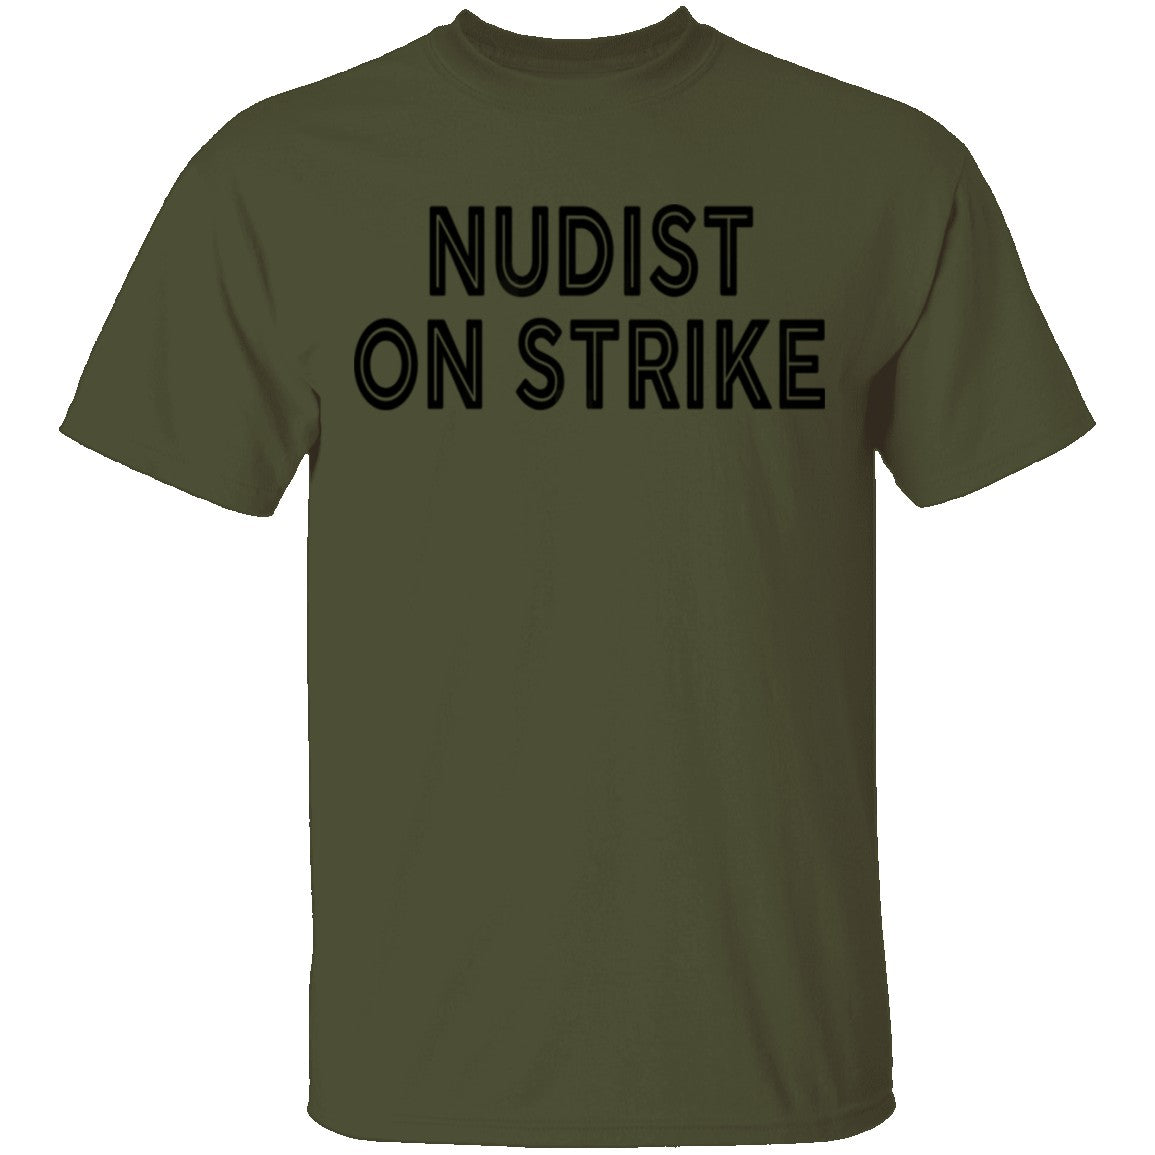 anshu chauhan recommends nudist on strike pic